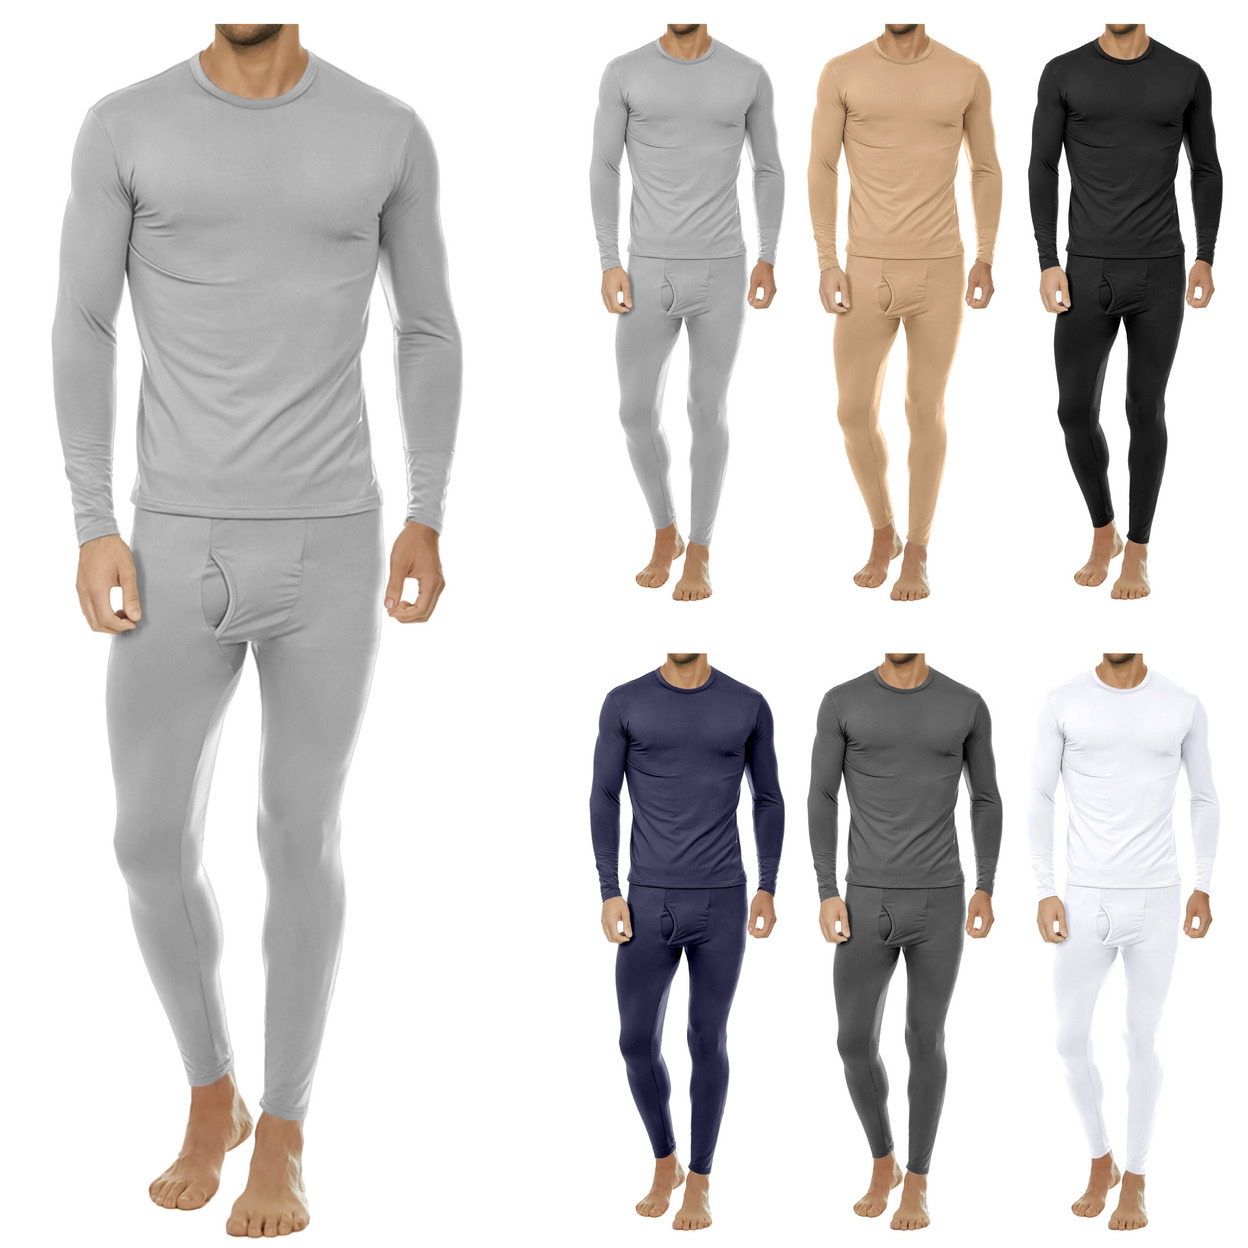 2-Sets: Men's Winter Warm Fleece Lined Thermal Underwear Set For Cold Weather - Black&white, X-large